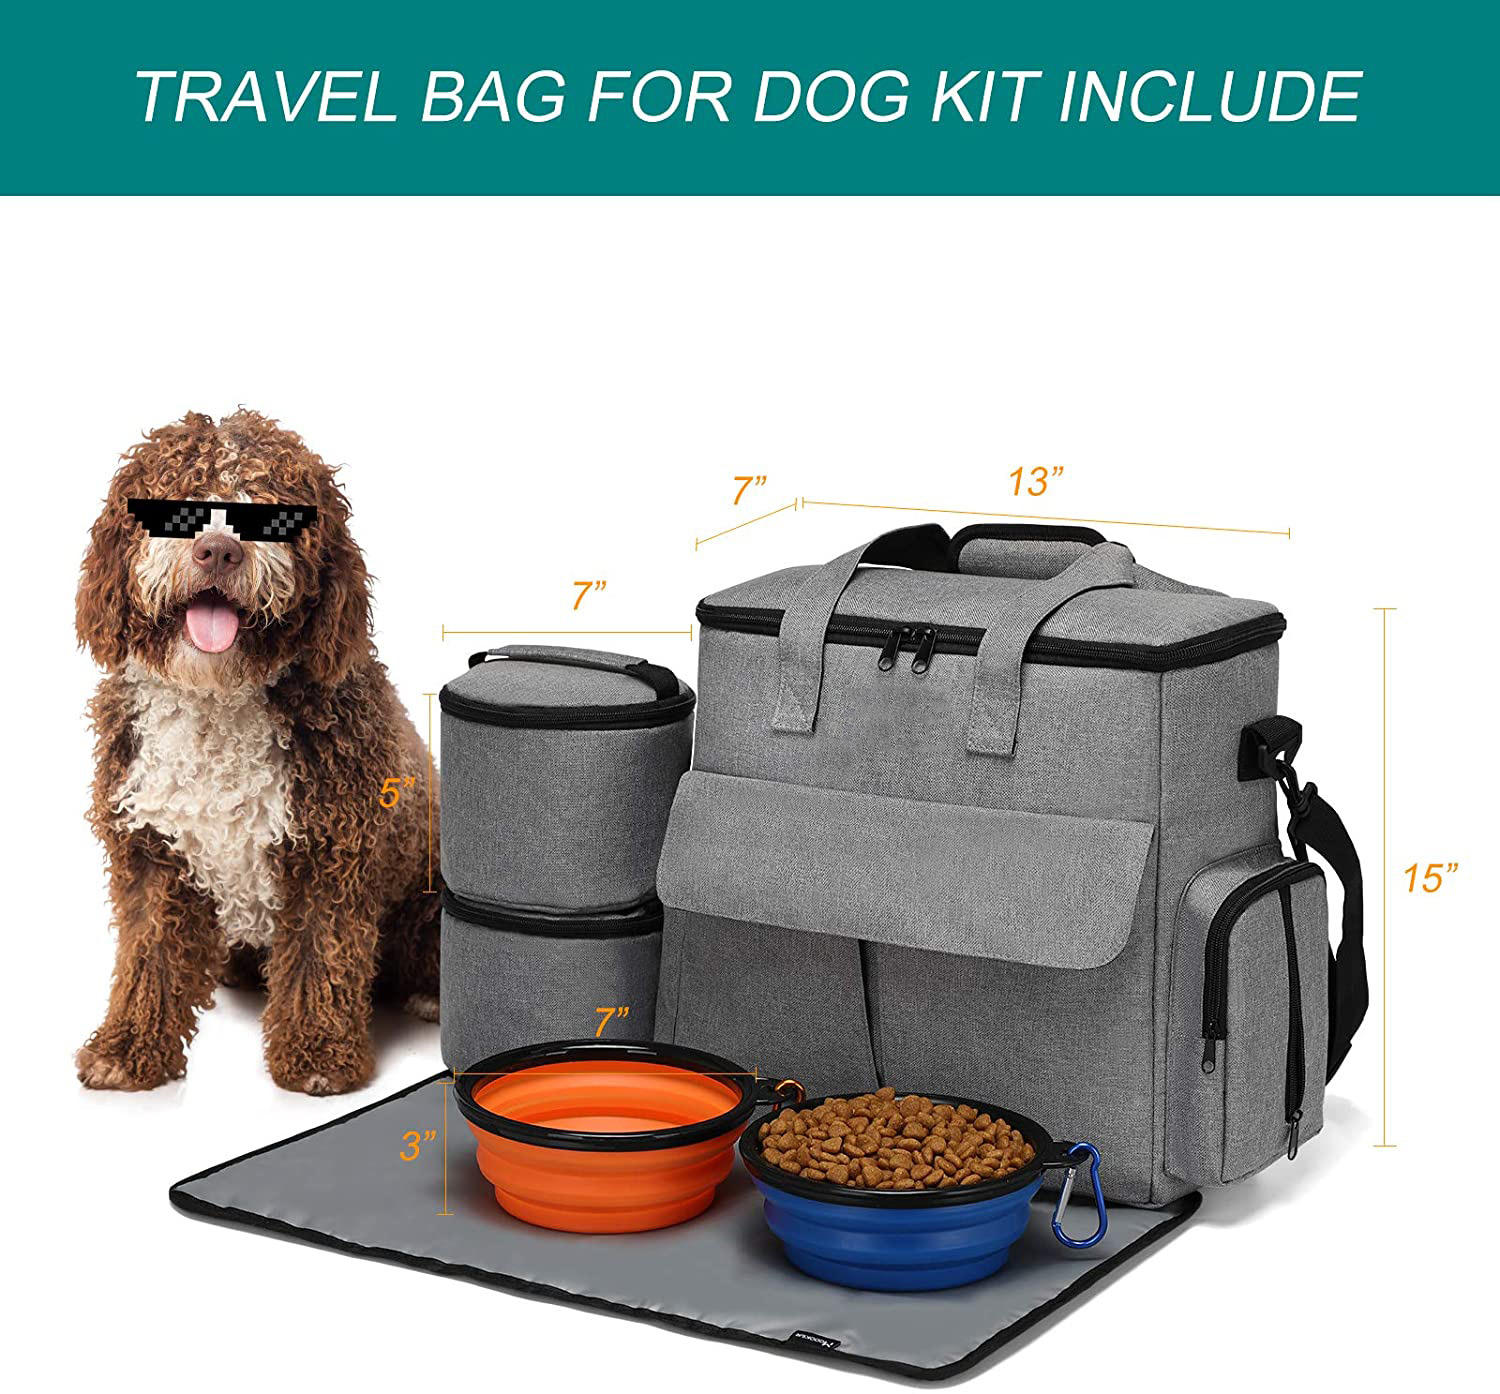 Dog Travel Bag Airline Approved Organizer For Pet Supplies With Multi-function Pockets Weekend Pet Travel Set For Dog And Cat